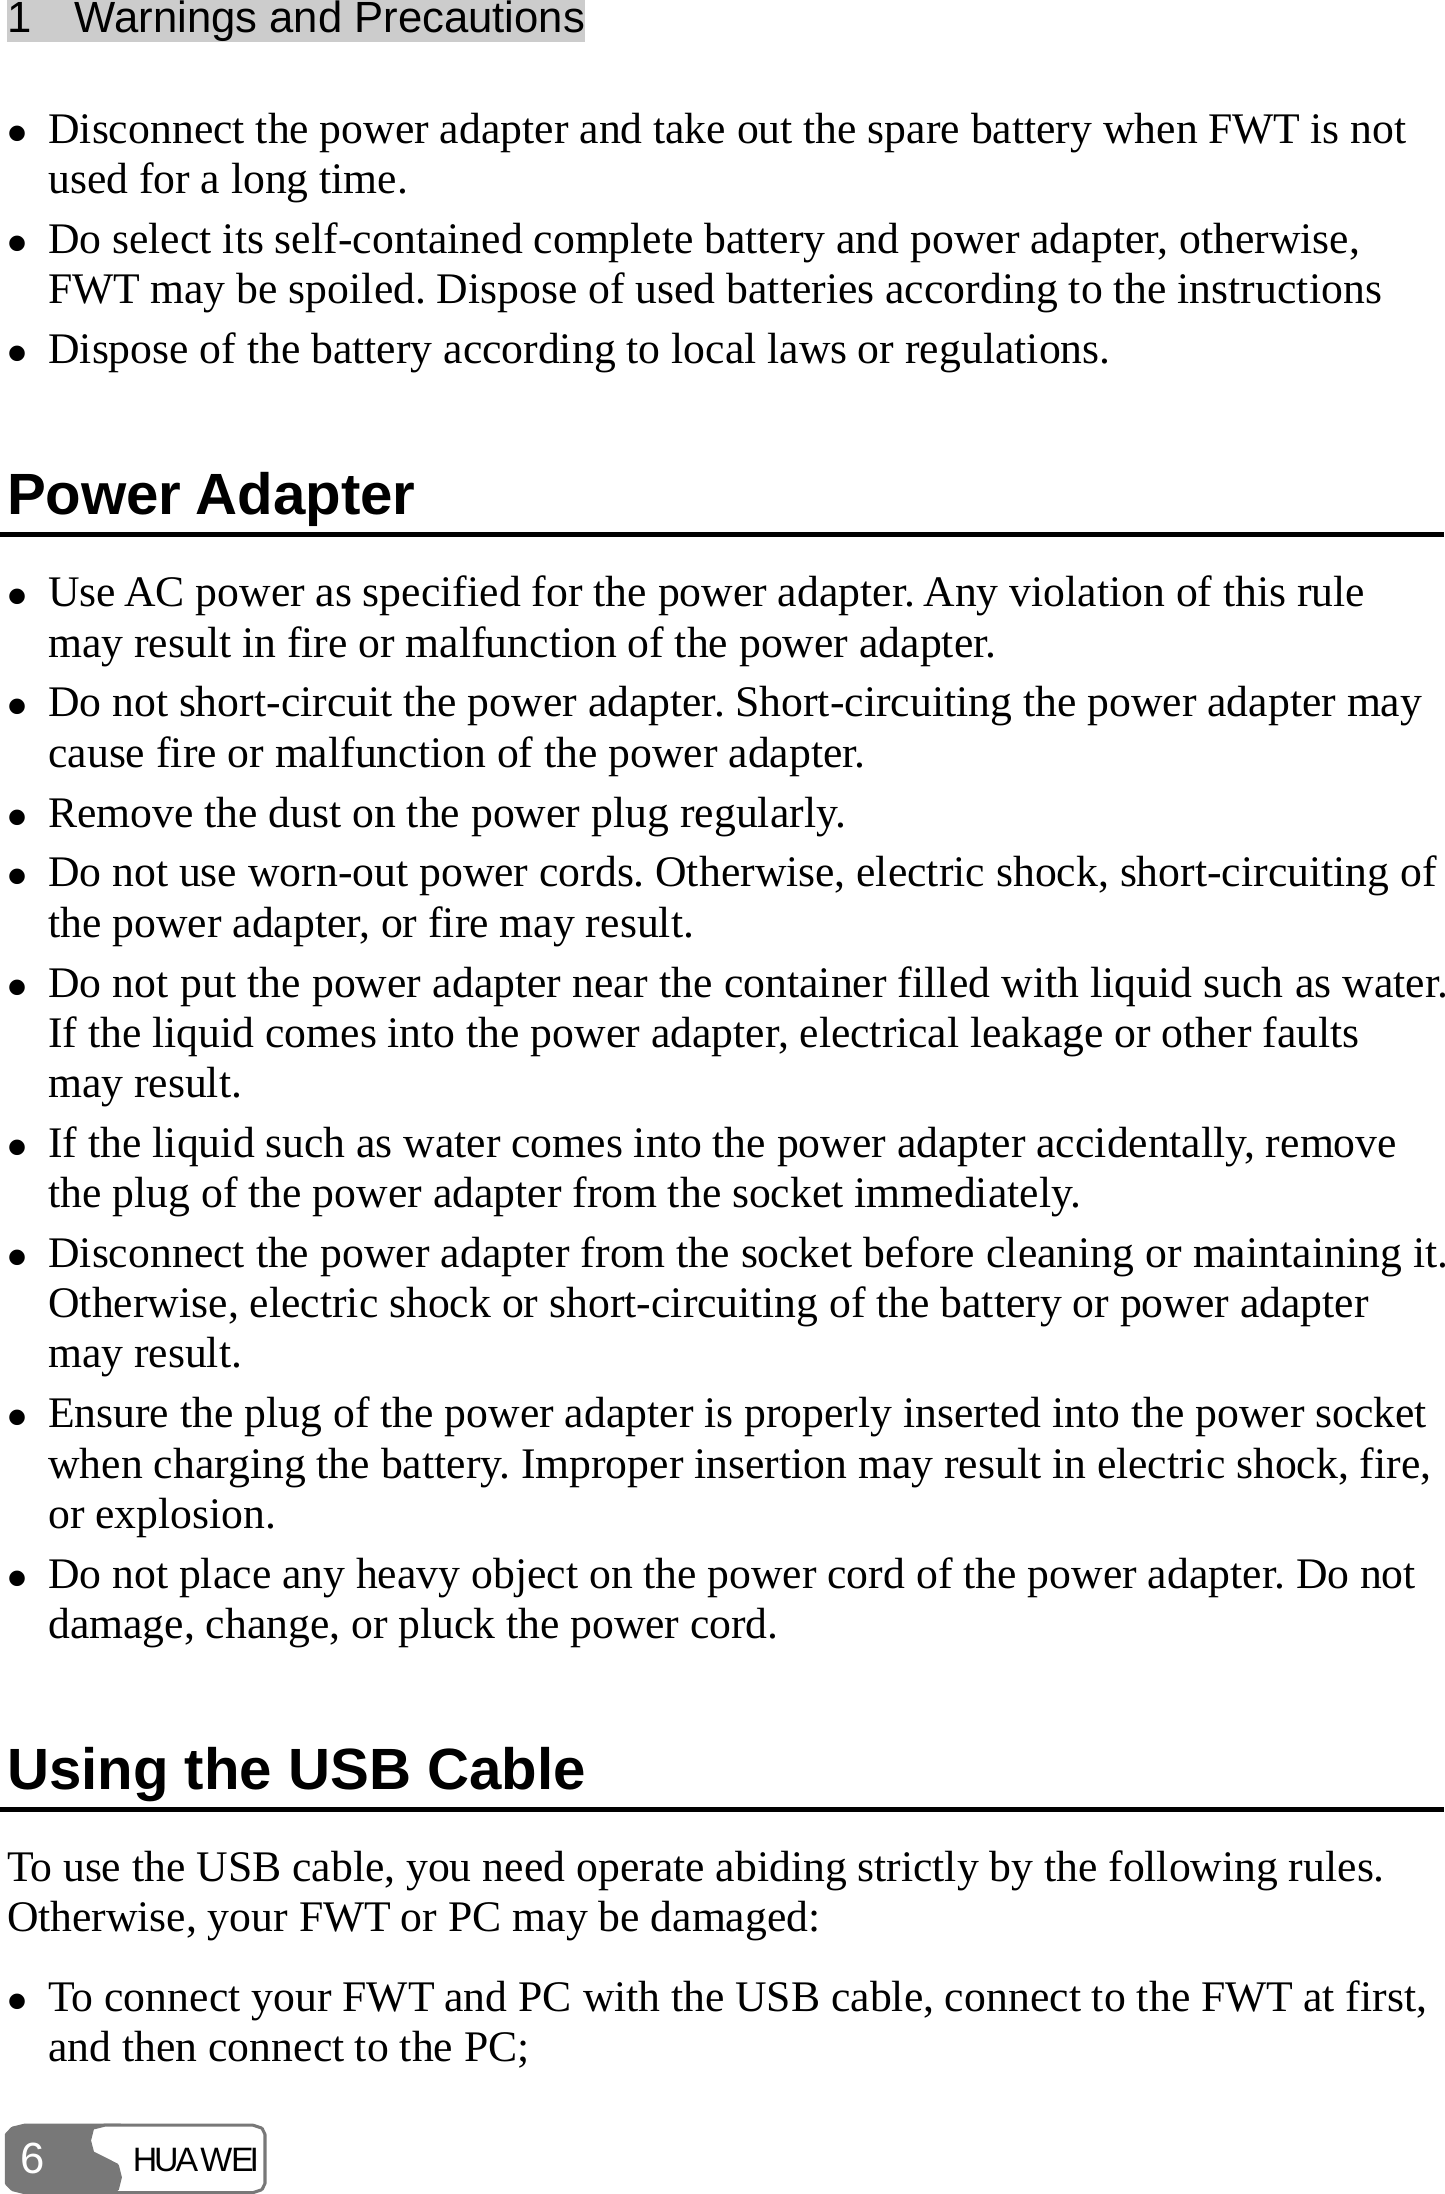 1  Warnings and Precautions HUAWEI 6 z Disconnect the power adapter and take out the spare battery when FWT is not used for a long time. z Do select its self-contained complete battery and power adapter, otherwise, FWT may be spoiled. Dispose of used batteries according to the instructions z Dispose of the battery according to local laws or regulations. Power Adapter z Use AC power as specified for the power adapter. Any violation of this rule may result in fire or malfunction of the power adapter. z Do not short-circuit the power adapter. Short-circuiting the power adapter may cause fire or malfunction of the power adapter. z Remove the dust on the power plug regularly. z Do not use worn-out power cords. Otherwise, electric shock, short-circuiting of the power adapter, or fire may result. z Do not put the power adapter near the container filled with liquid such as water. If the liquid comes into the power adapter, electrical leakage or other faults may result. z If the liquid such as water comes into the power adapter accidentally, remove the plug of the power adapter from the socket immediately. z Disconnect the power adapter from the socket before cleaning or maintaining it. Otherwise, electric shock or short-circuiting of the battery or power adapter may result. z Ensure the plug of the power adapter is properly inserted into the power socket when charging the battery. Improper insertion may result in electric shock, fire, or explosion. z Do not place any heavy object on the power cord of the power adapter. Do not damage, change, or pluck the power cord. Using the USB Cable To use the USB cable, you need operate abiding strictly by the following rules. Otherwise, your FWT or PC may be damaged: z To connect your FWT and PC with the USB cable, connect to the FWT at first, and then connect to the PC; 